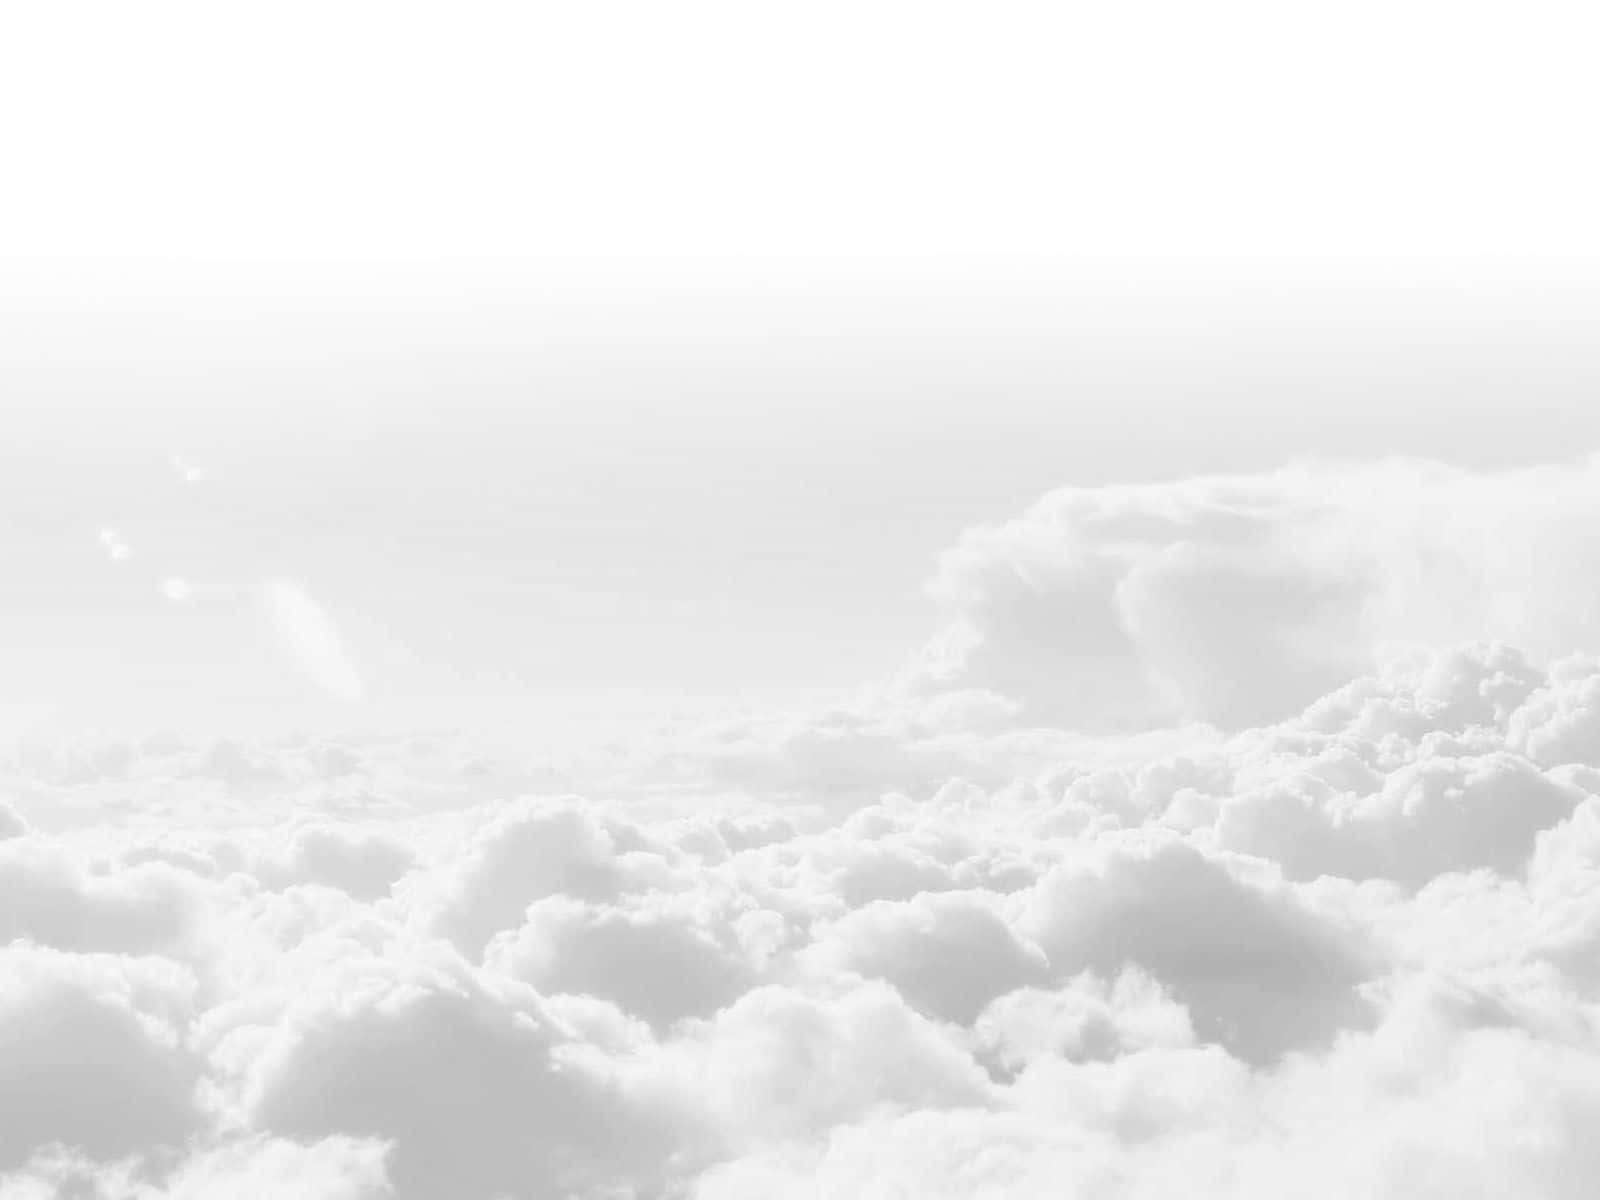 Aesthetic Clouds In White iPad Wallpaper